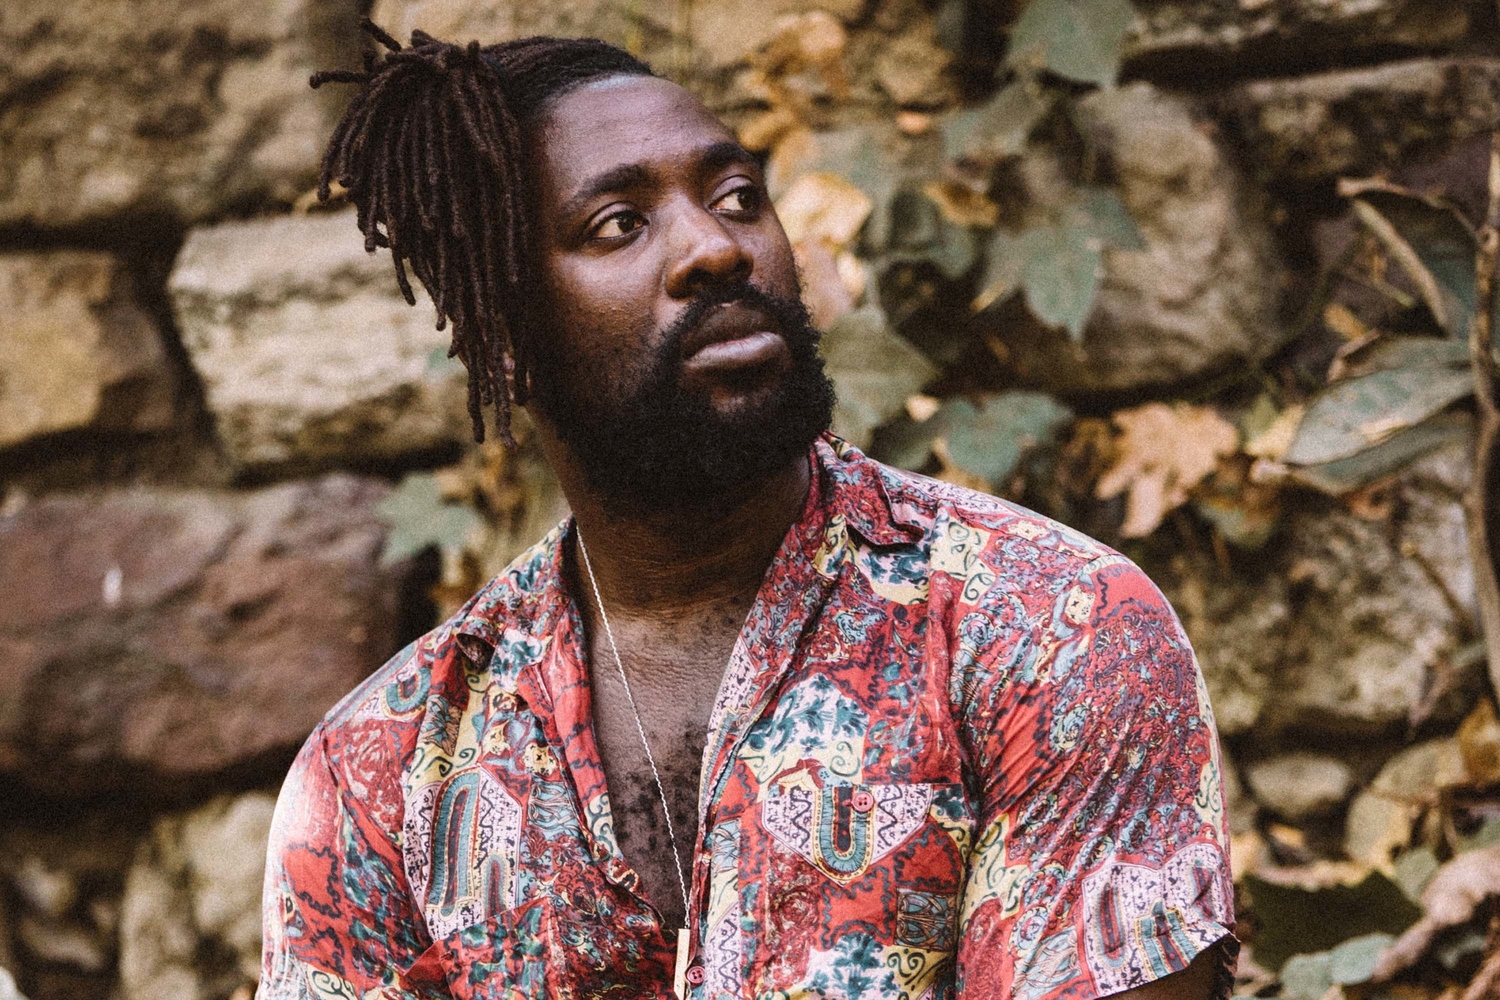 Bloc Party’s Kele Okereke has announced details of new solo LP ‘Fatherland’